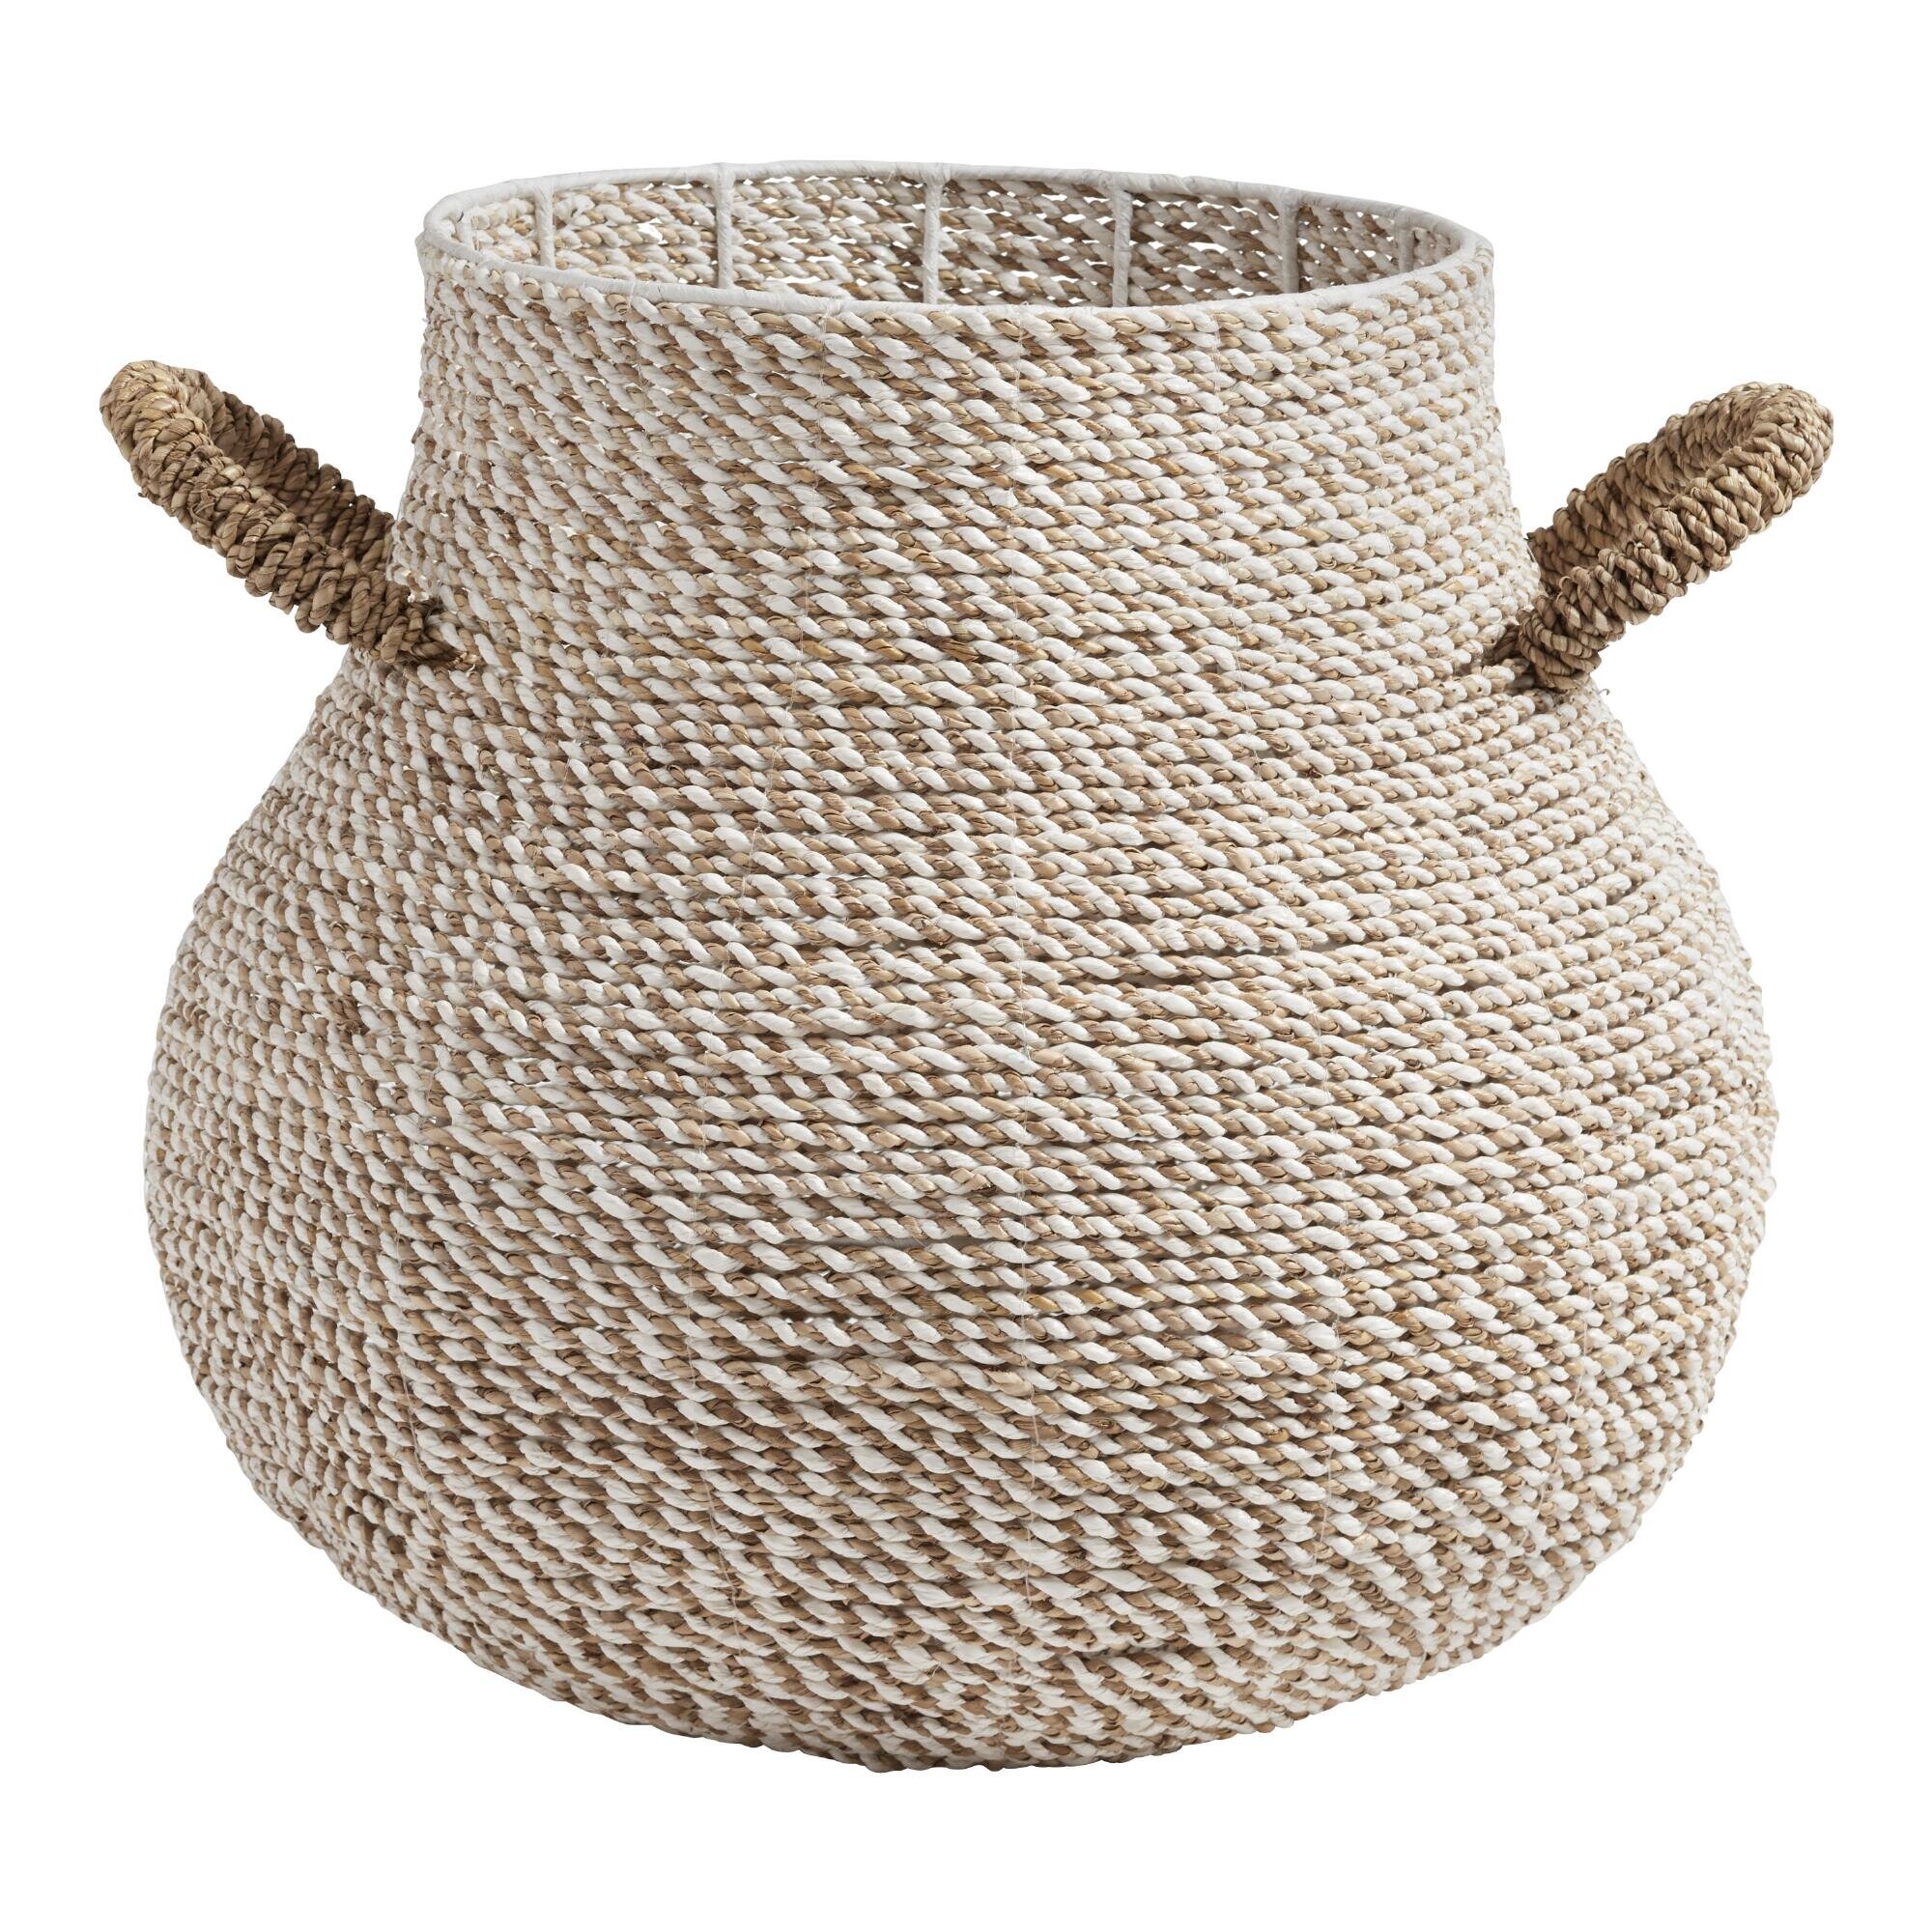 White And Natural Marled Seagrass Tess Belly Basket - World Market